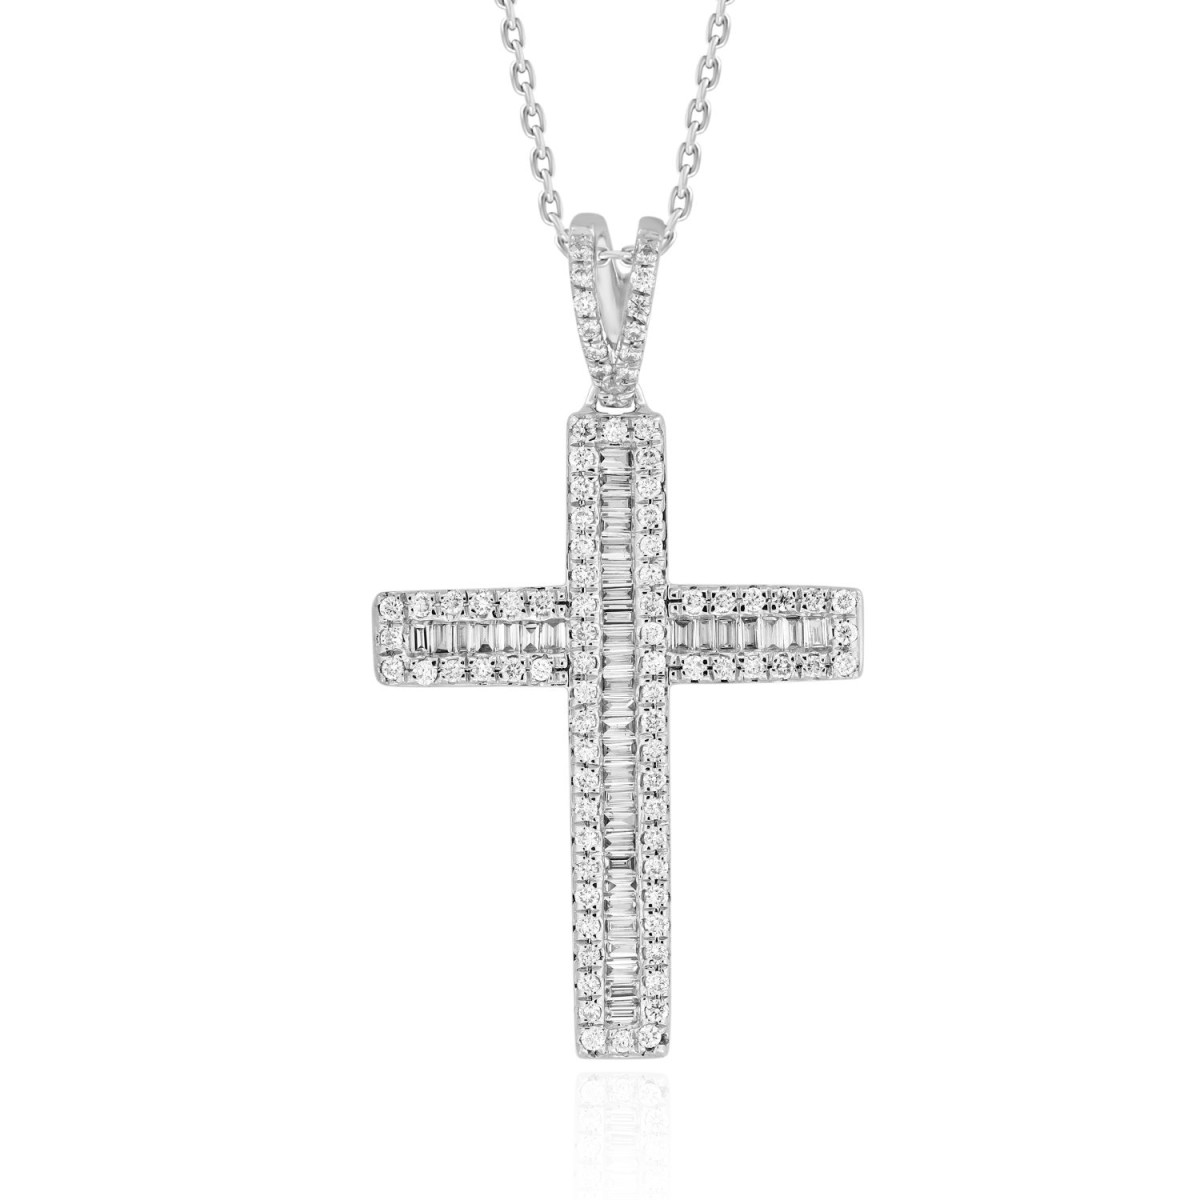 14K WHITE GOLD 5/8CT ROUND/BAGUETTE DIAMOND LADIES PENDANT WITH CHAIN 